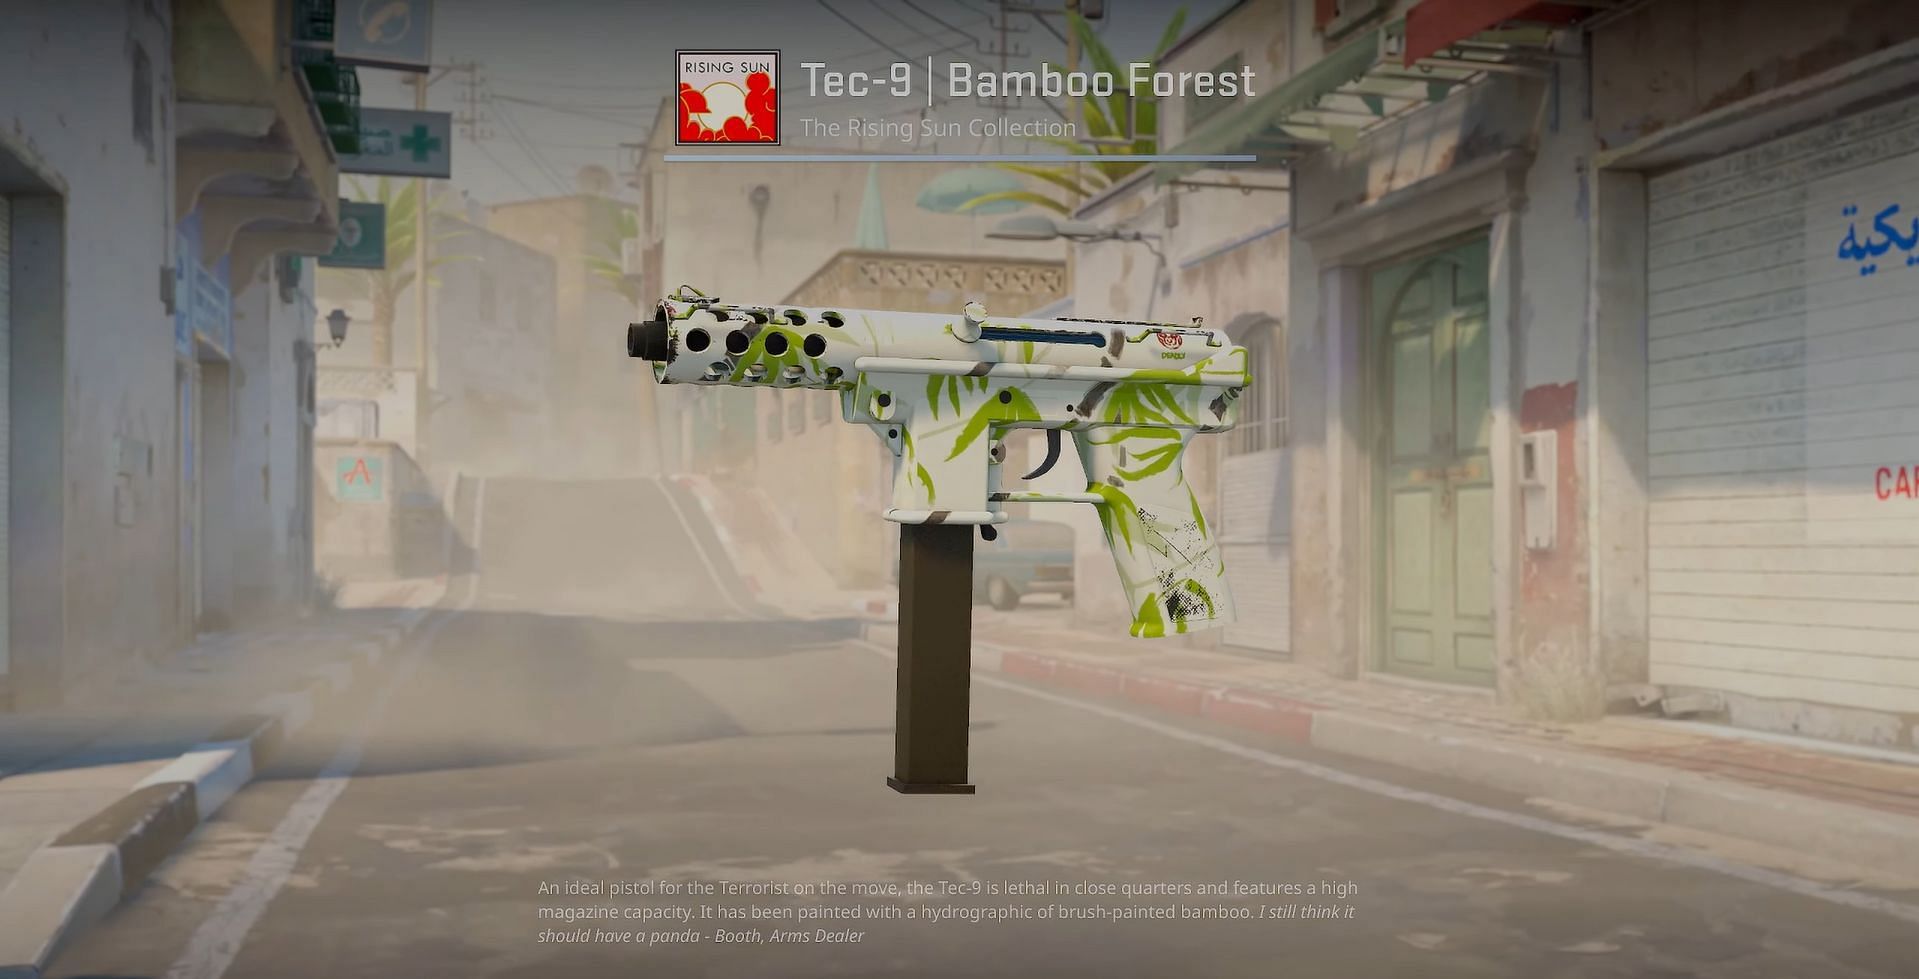 Tec-9 Bamboo Forest (Image via YouTube/covernant)